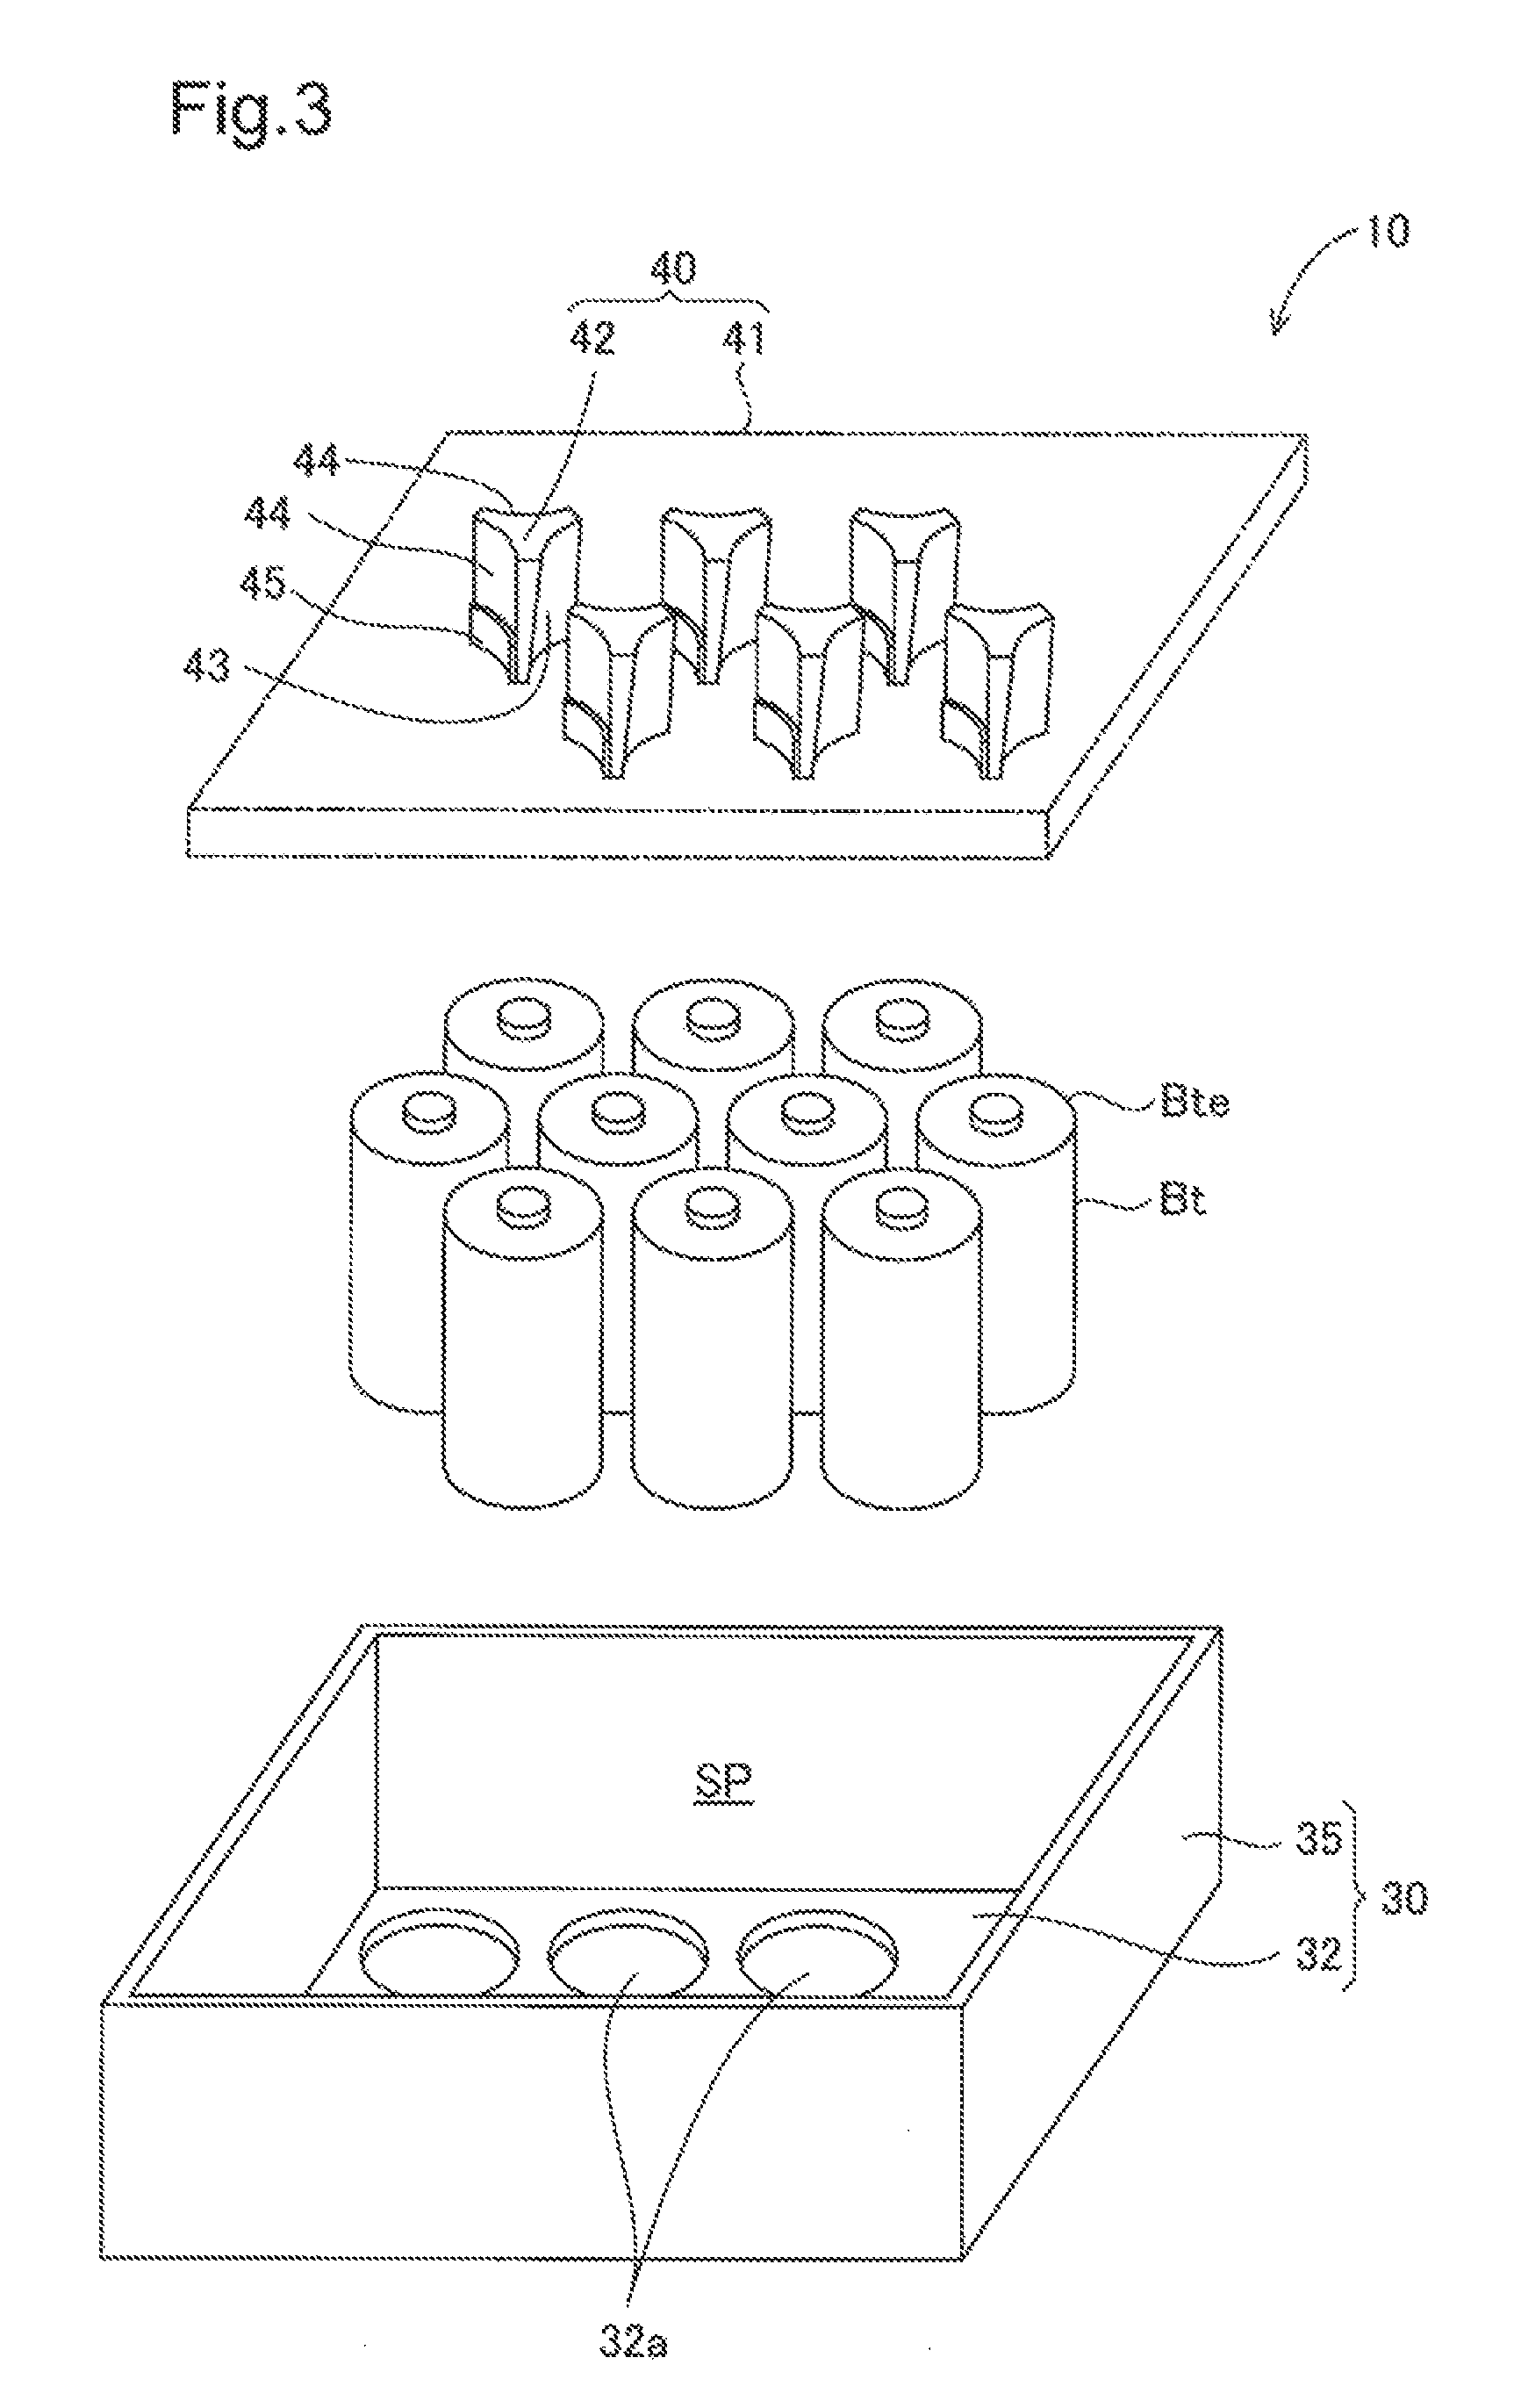 Battery device that holds batteries